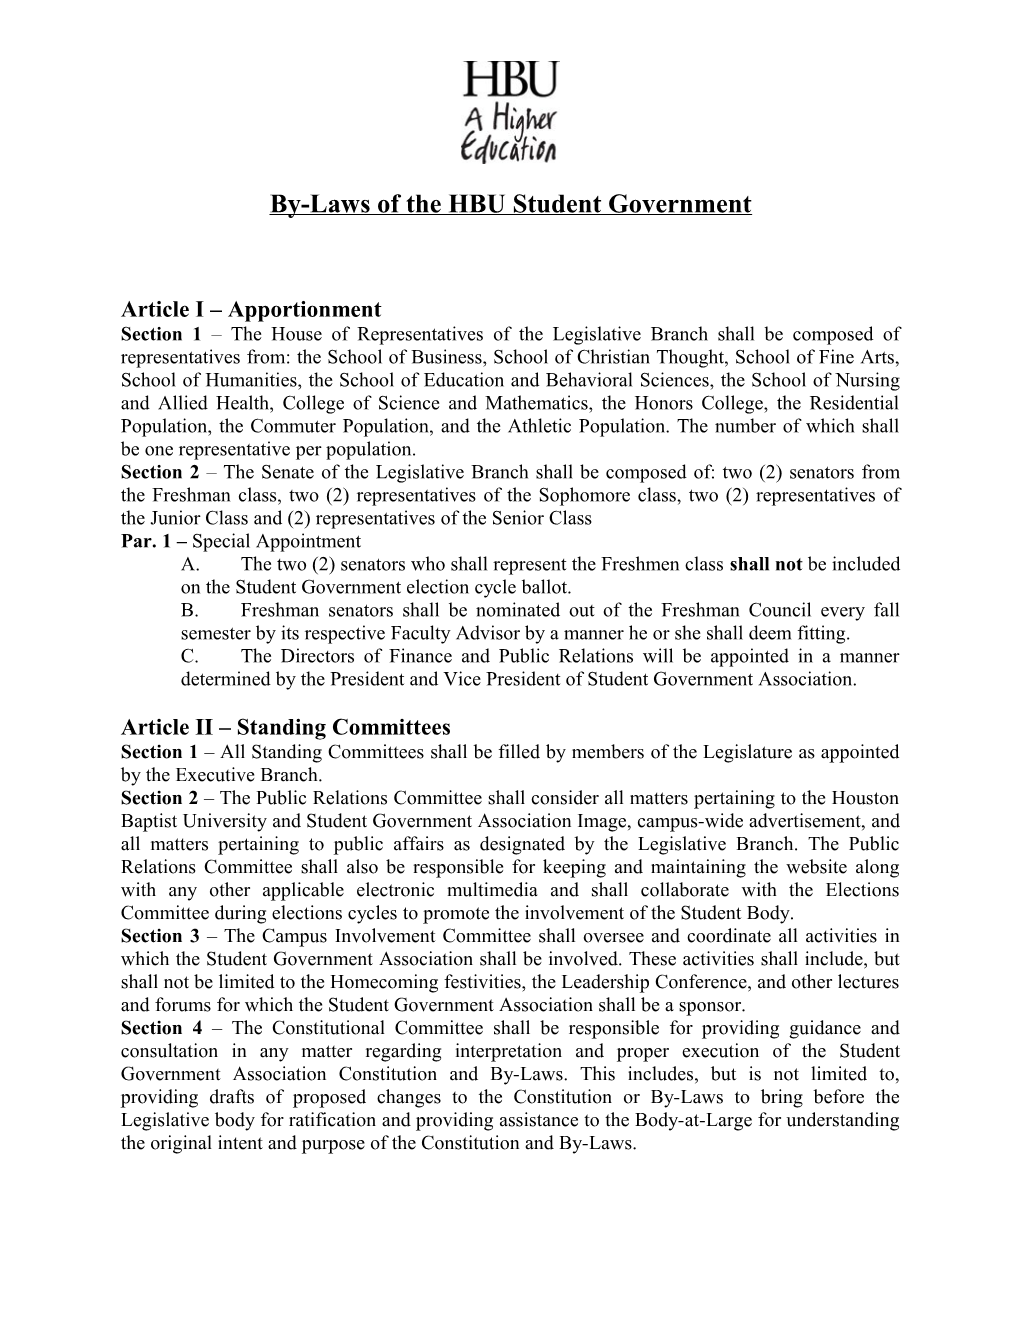 By-Laws of the Student Government